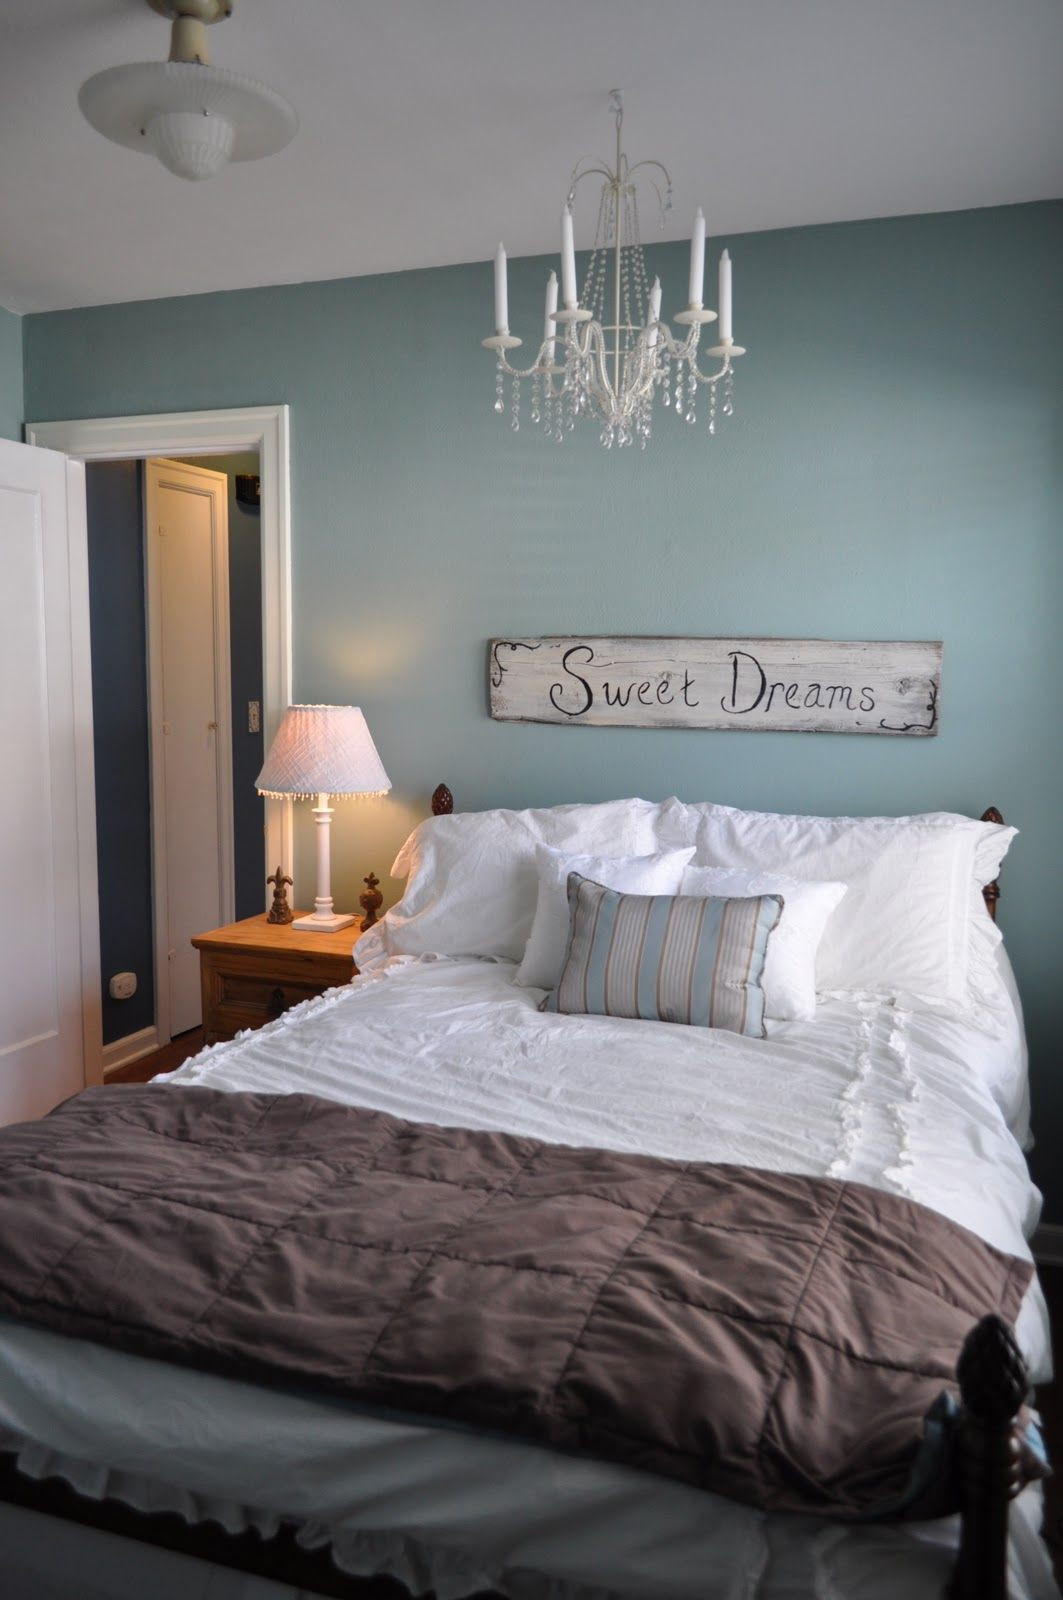 Pinterest Bedroom Colors
 Bedroom Wall Painting Love this color just reminds me